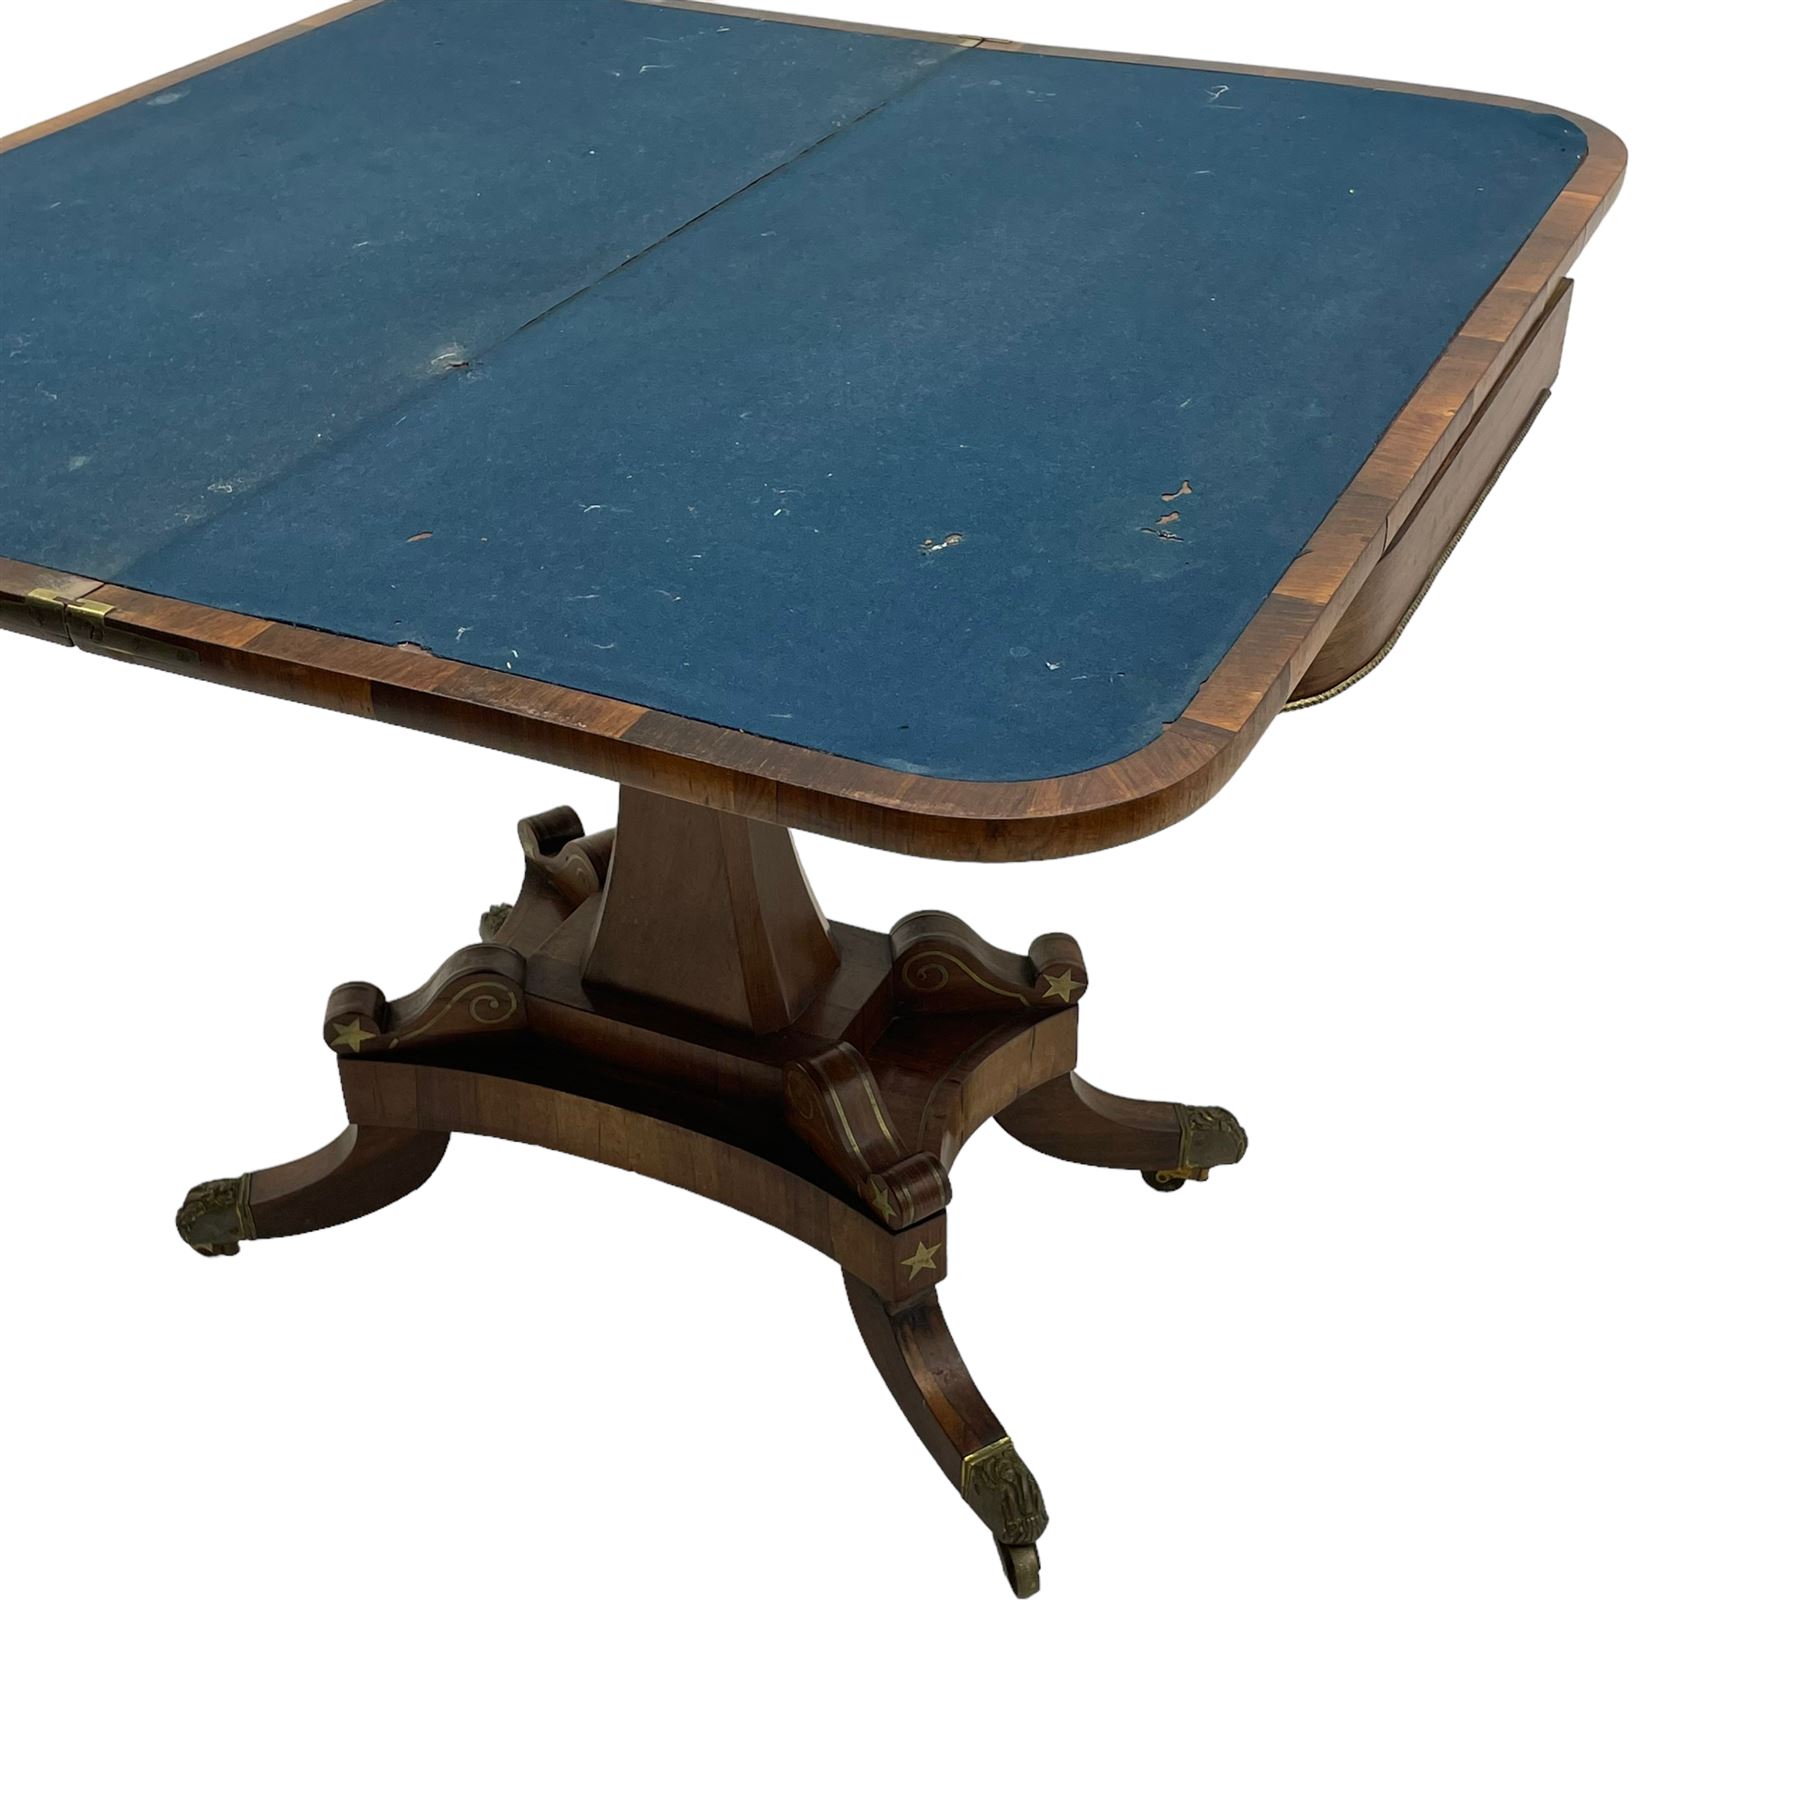 Regency rosewood and brass inlaid card table - Image 12 of 15